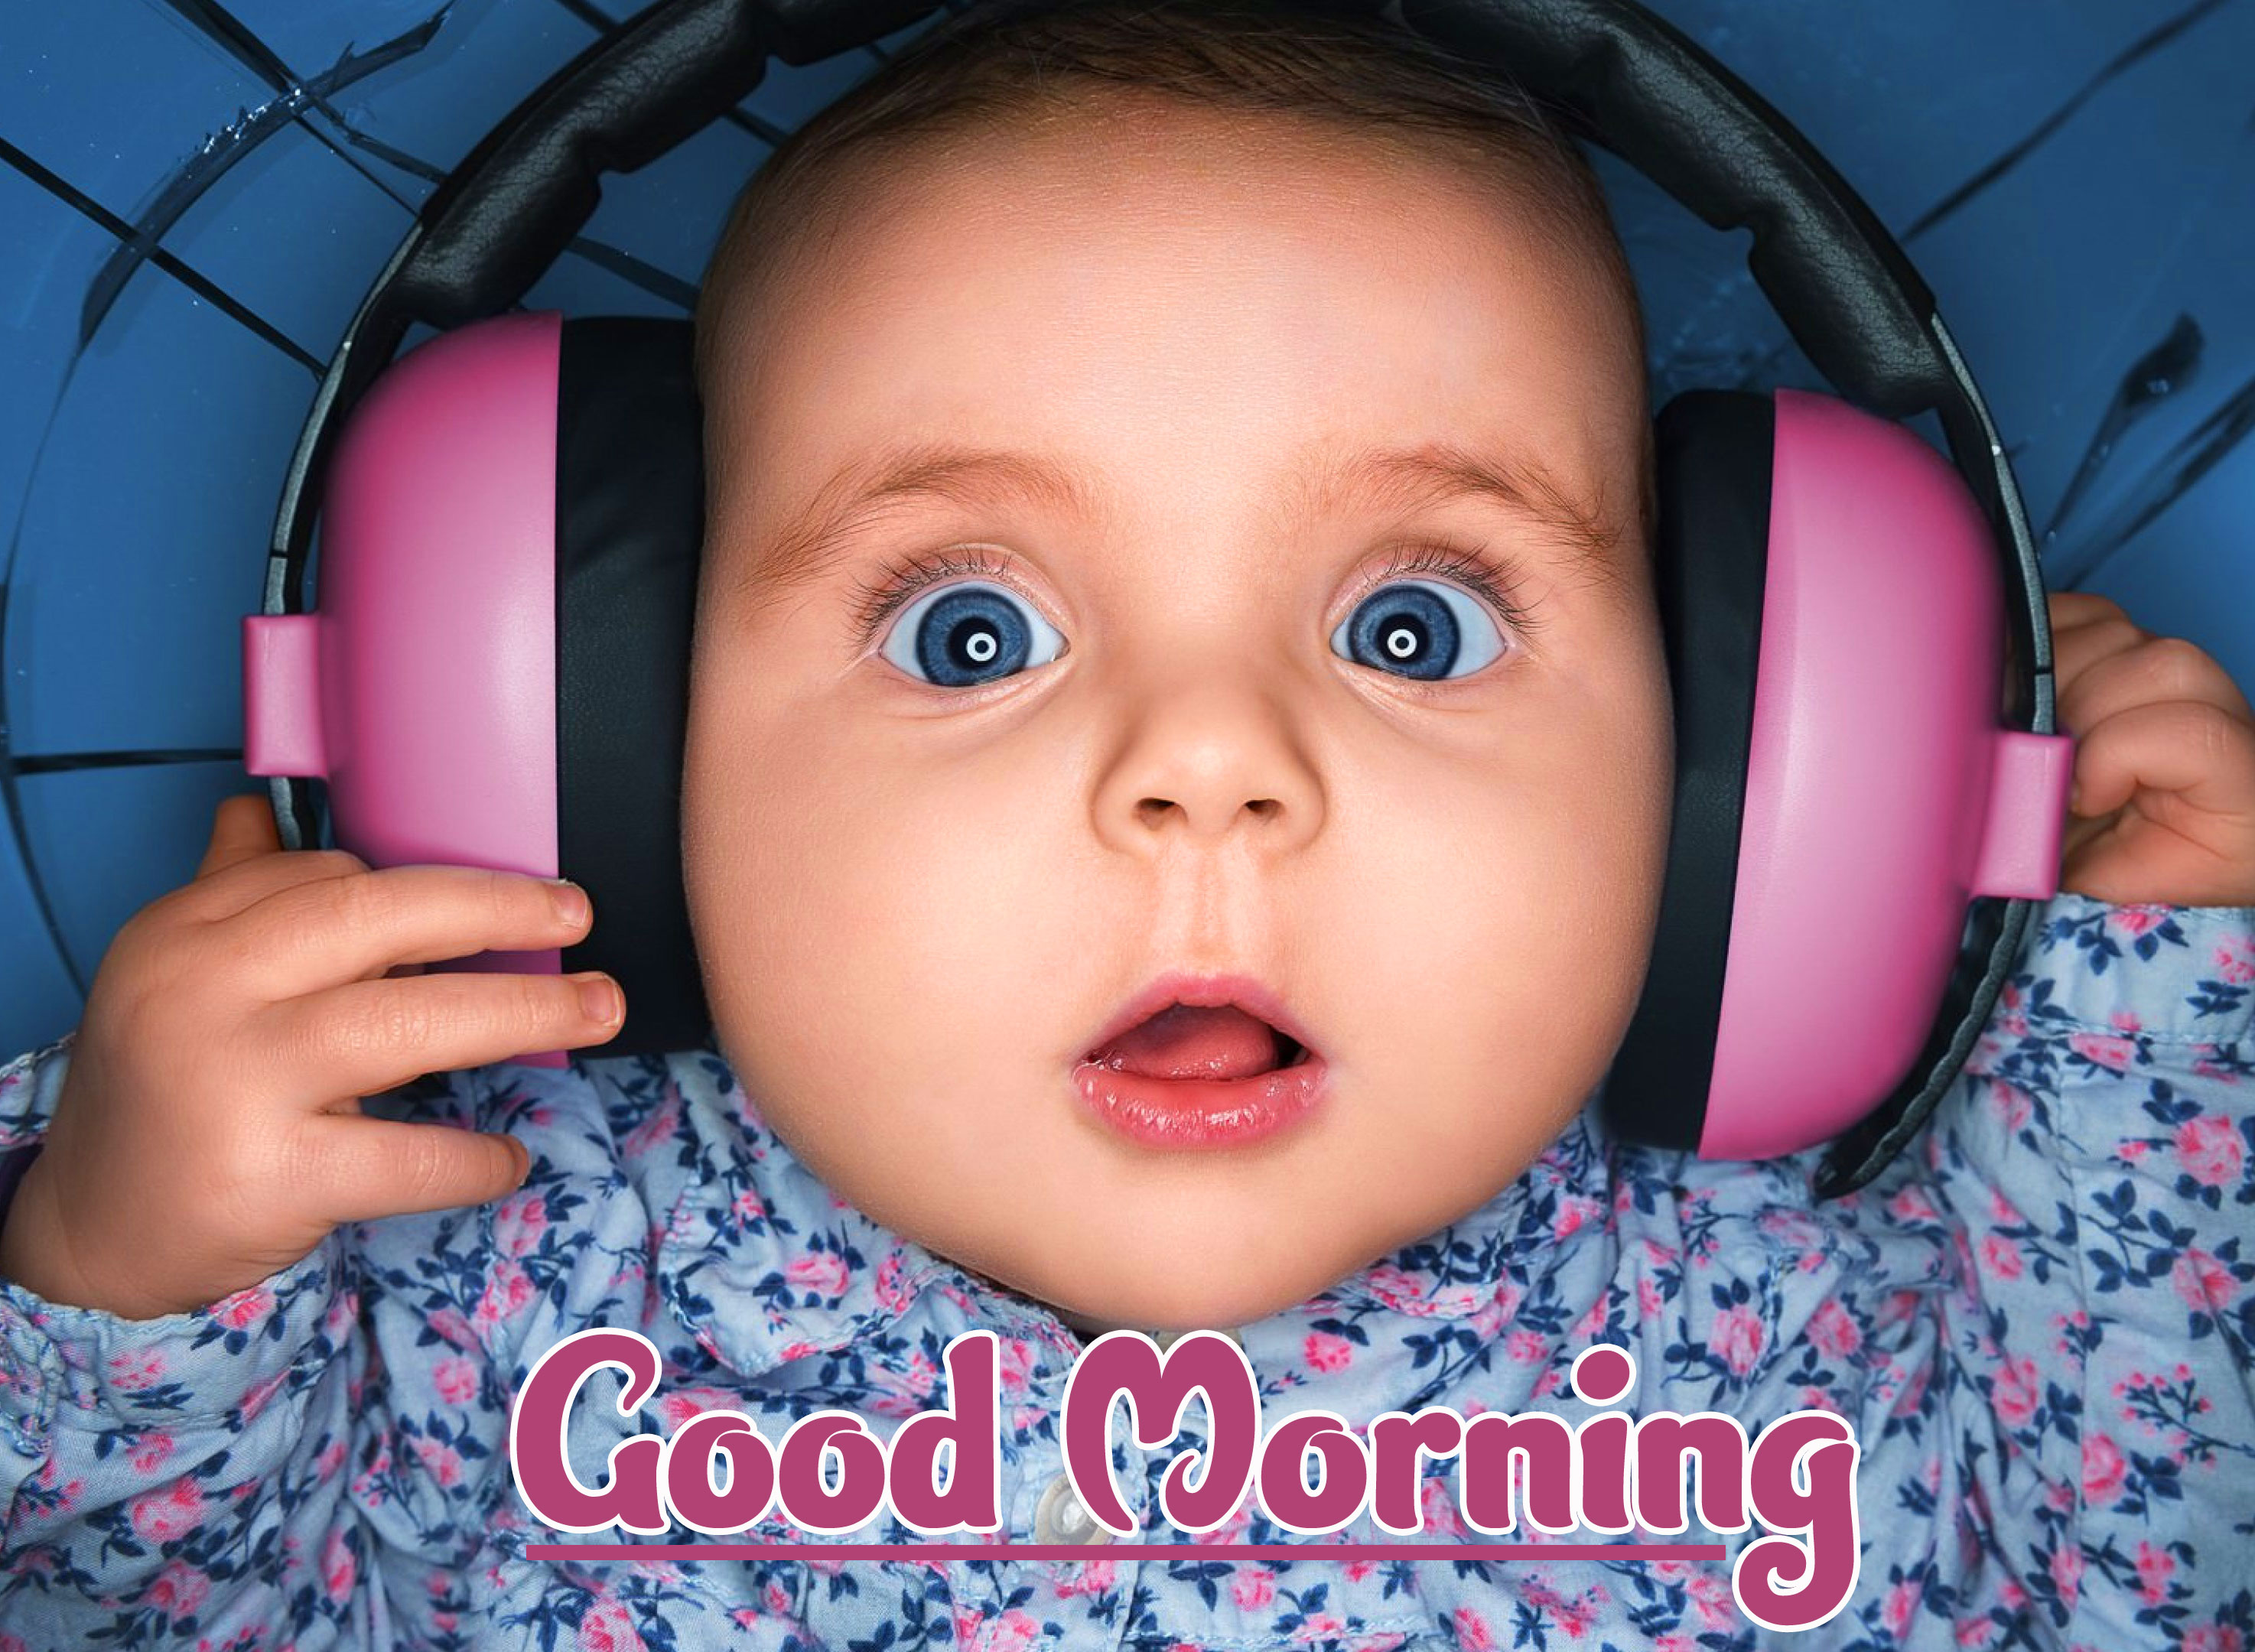 Funny Good Morning Wishes Pics Wallpaper Download 